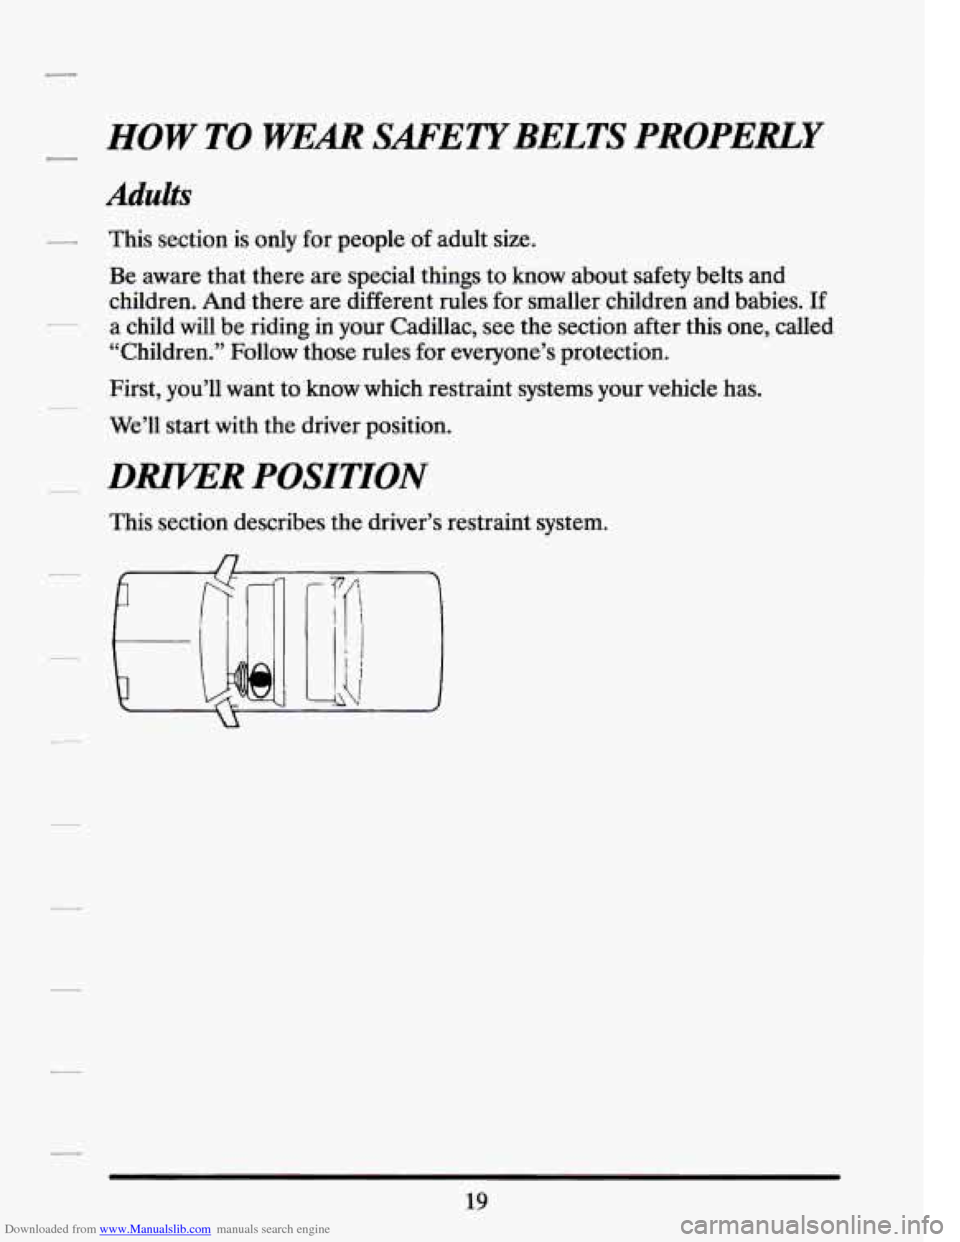 CADILLAC SEVILLE 1994 4.G Owners Guide Downloaded from www.Manualslib.com manuals search engine II HOW TO WEM SAFETYBELTS PROPERLY 
Adults 
- This section is  only for  people of adult size. 
Be aware  that  there  are  special  things to 